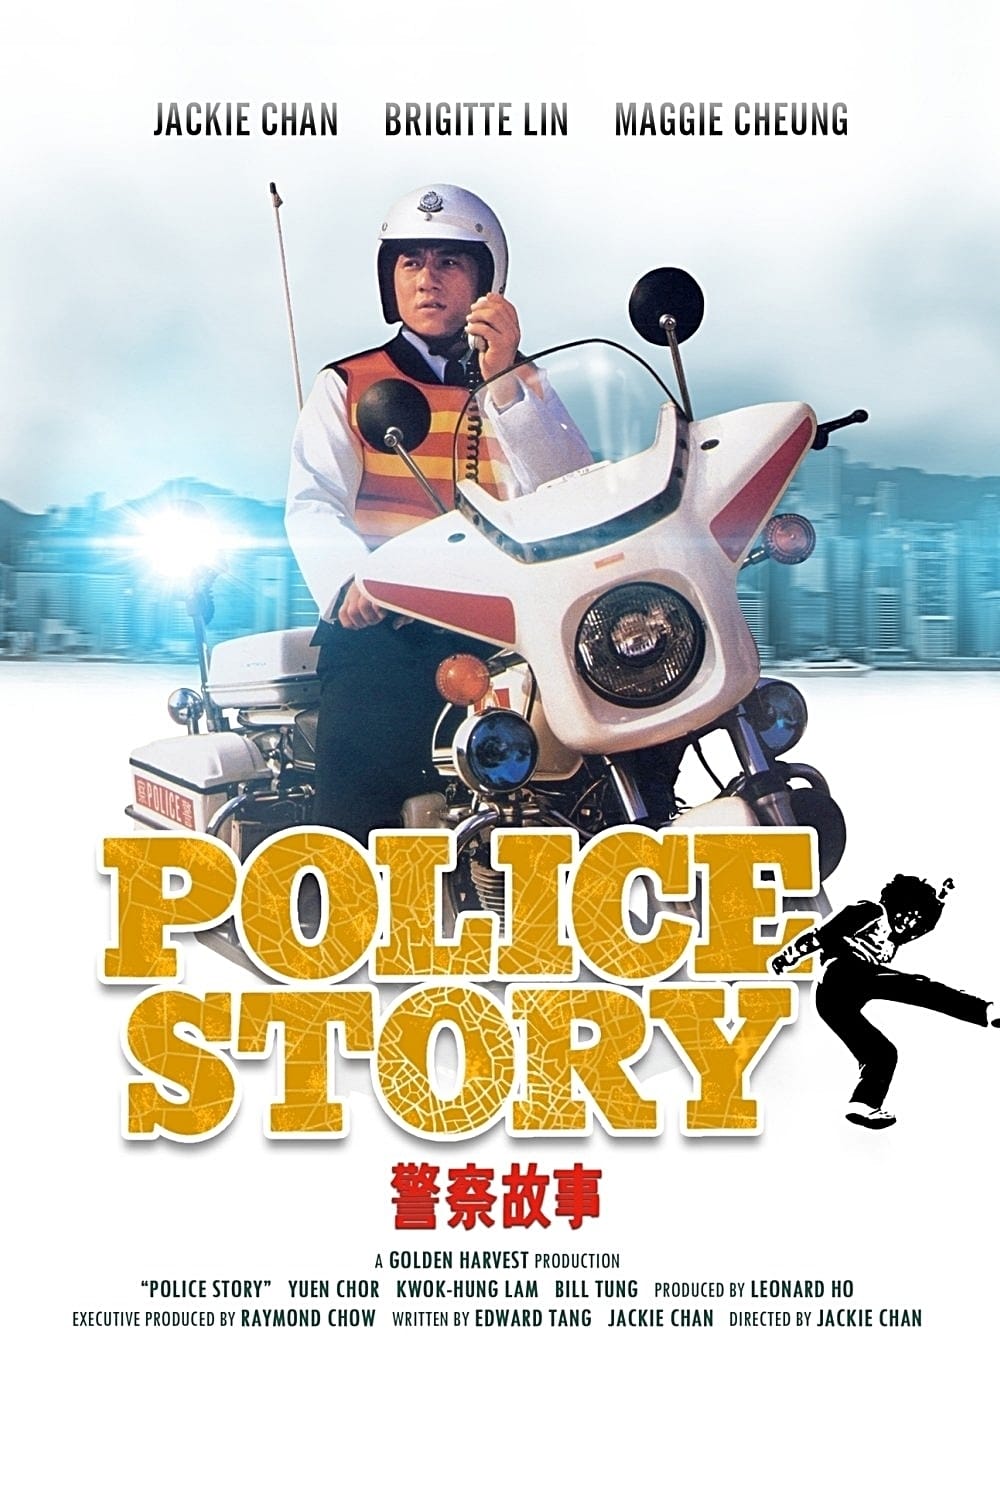 EN - Police Story 1 (1985) JACKIE CHAN (ENG-SUB)